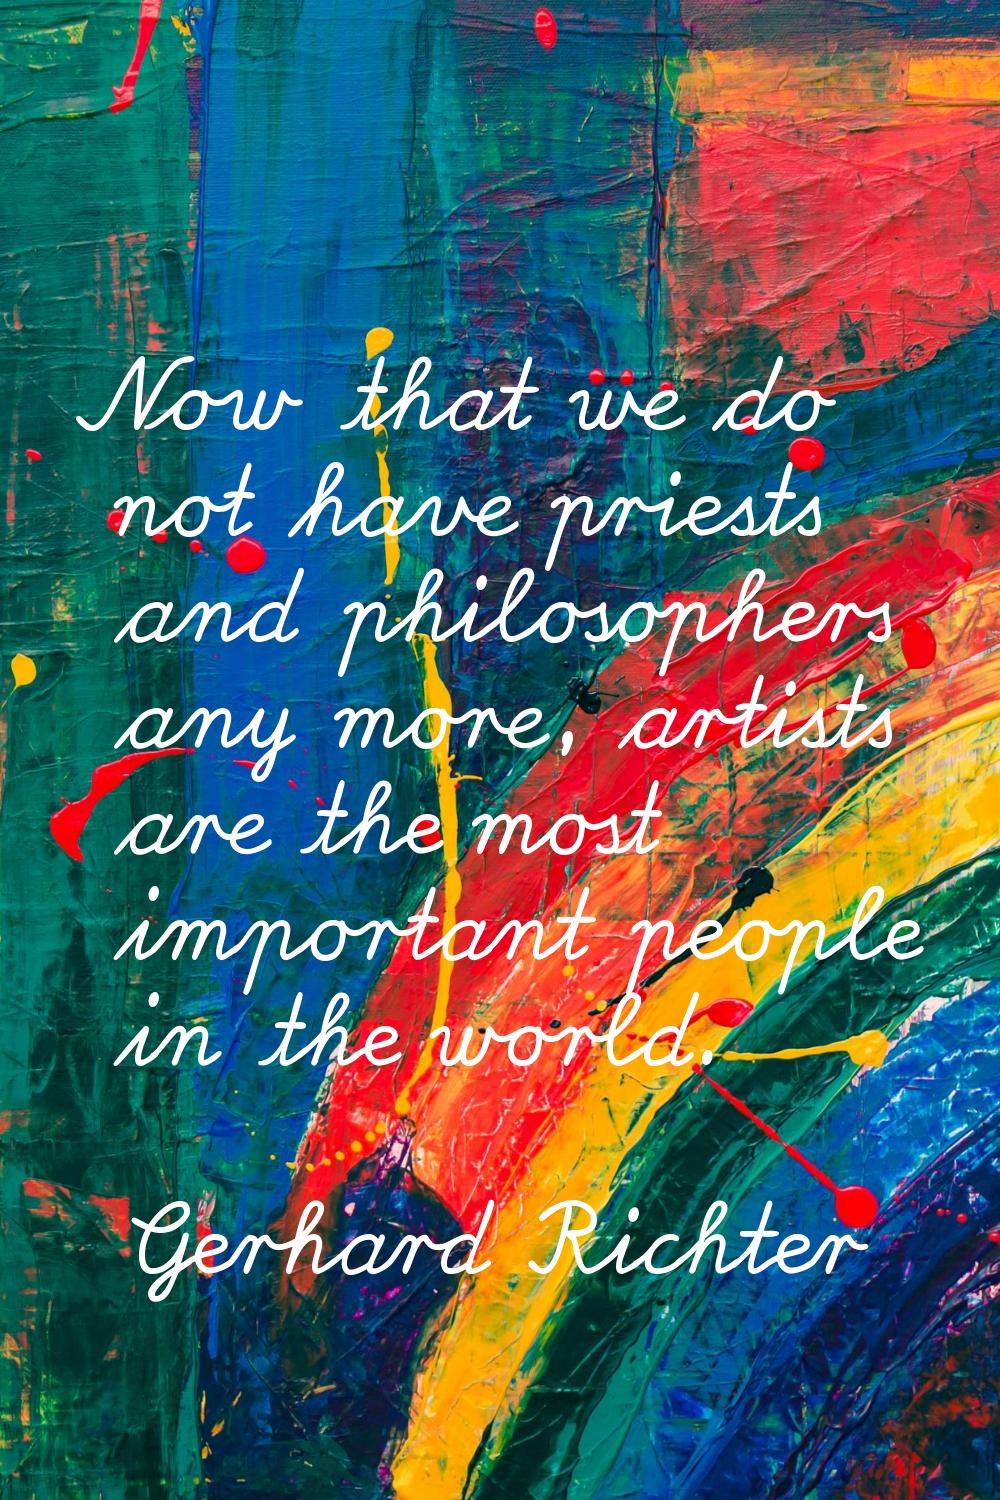 Now that we do not have priests and philosophers any more, artists are the most important people in